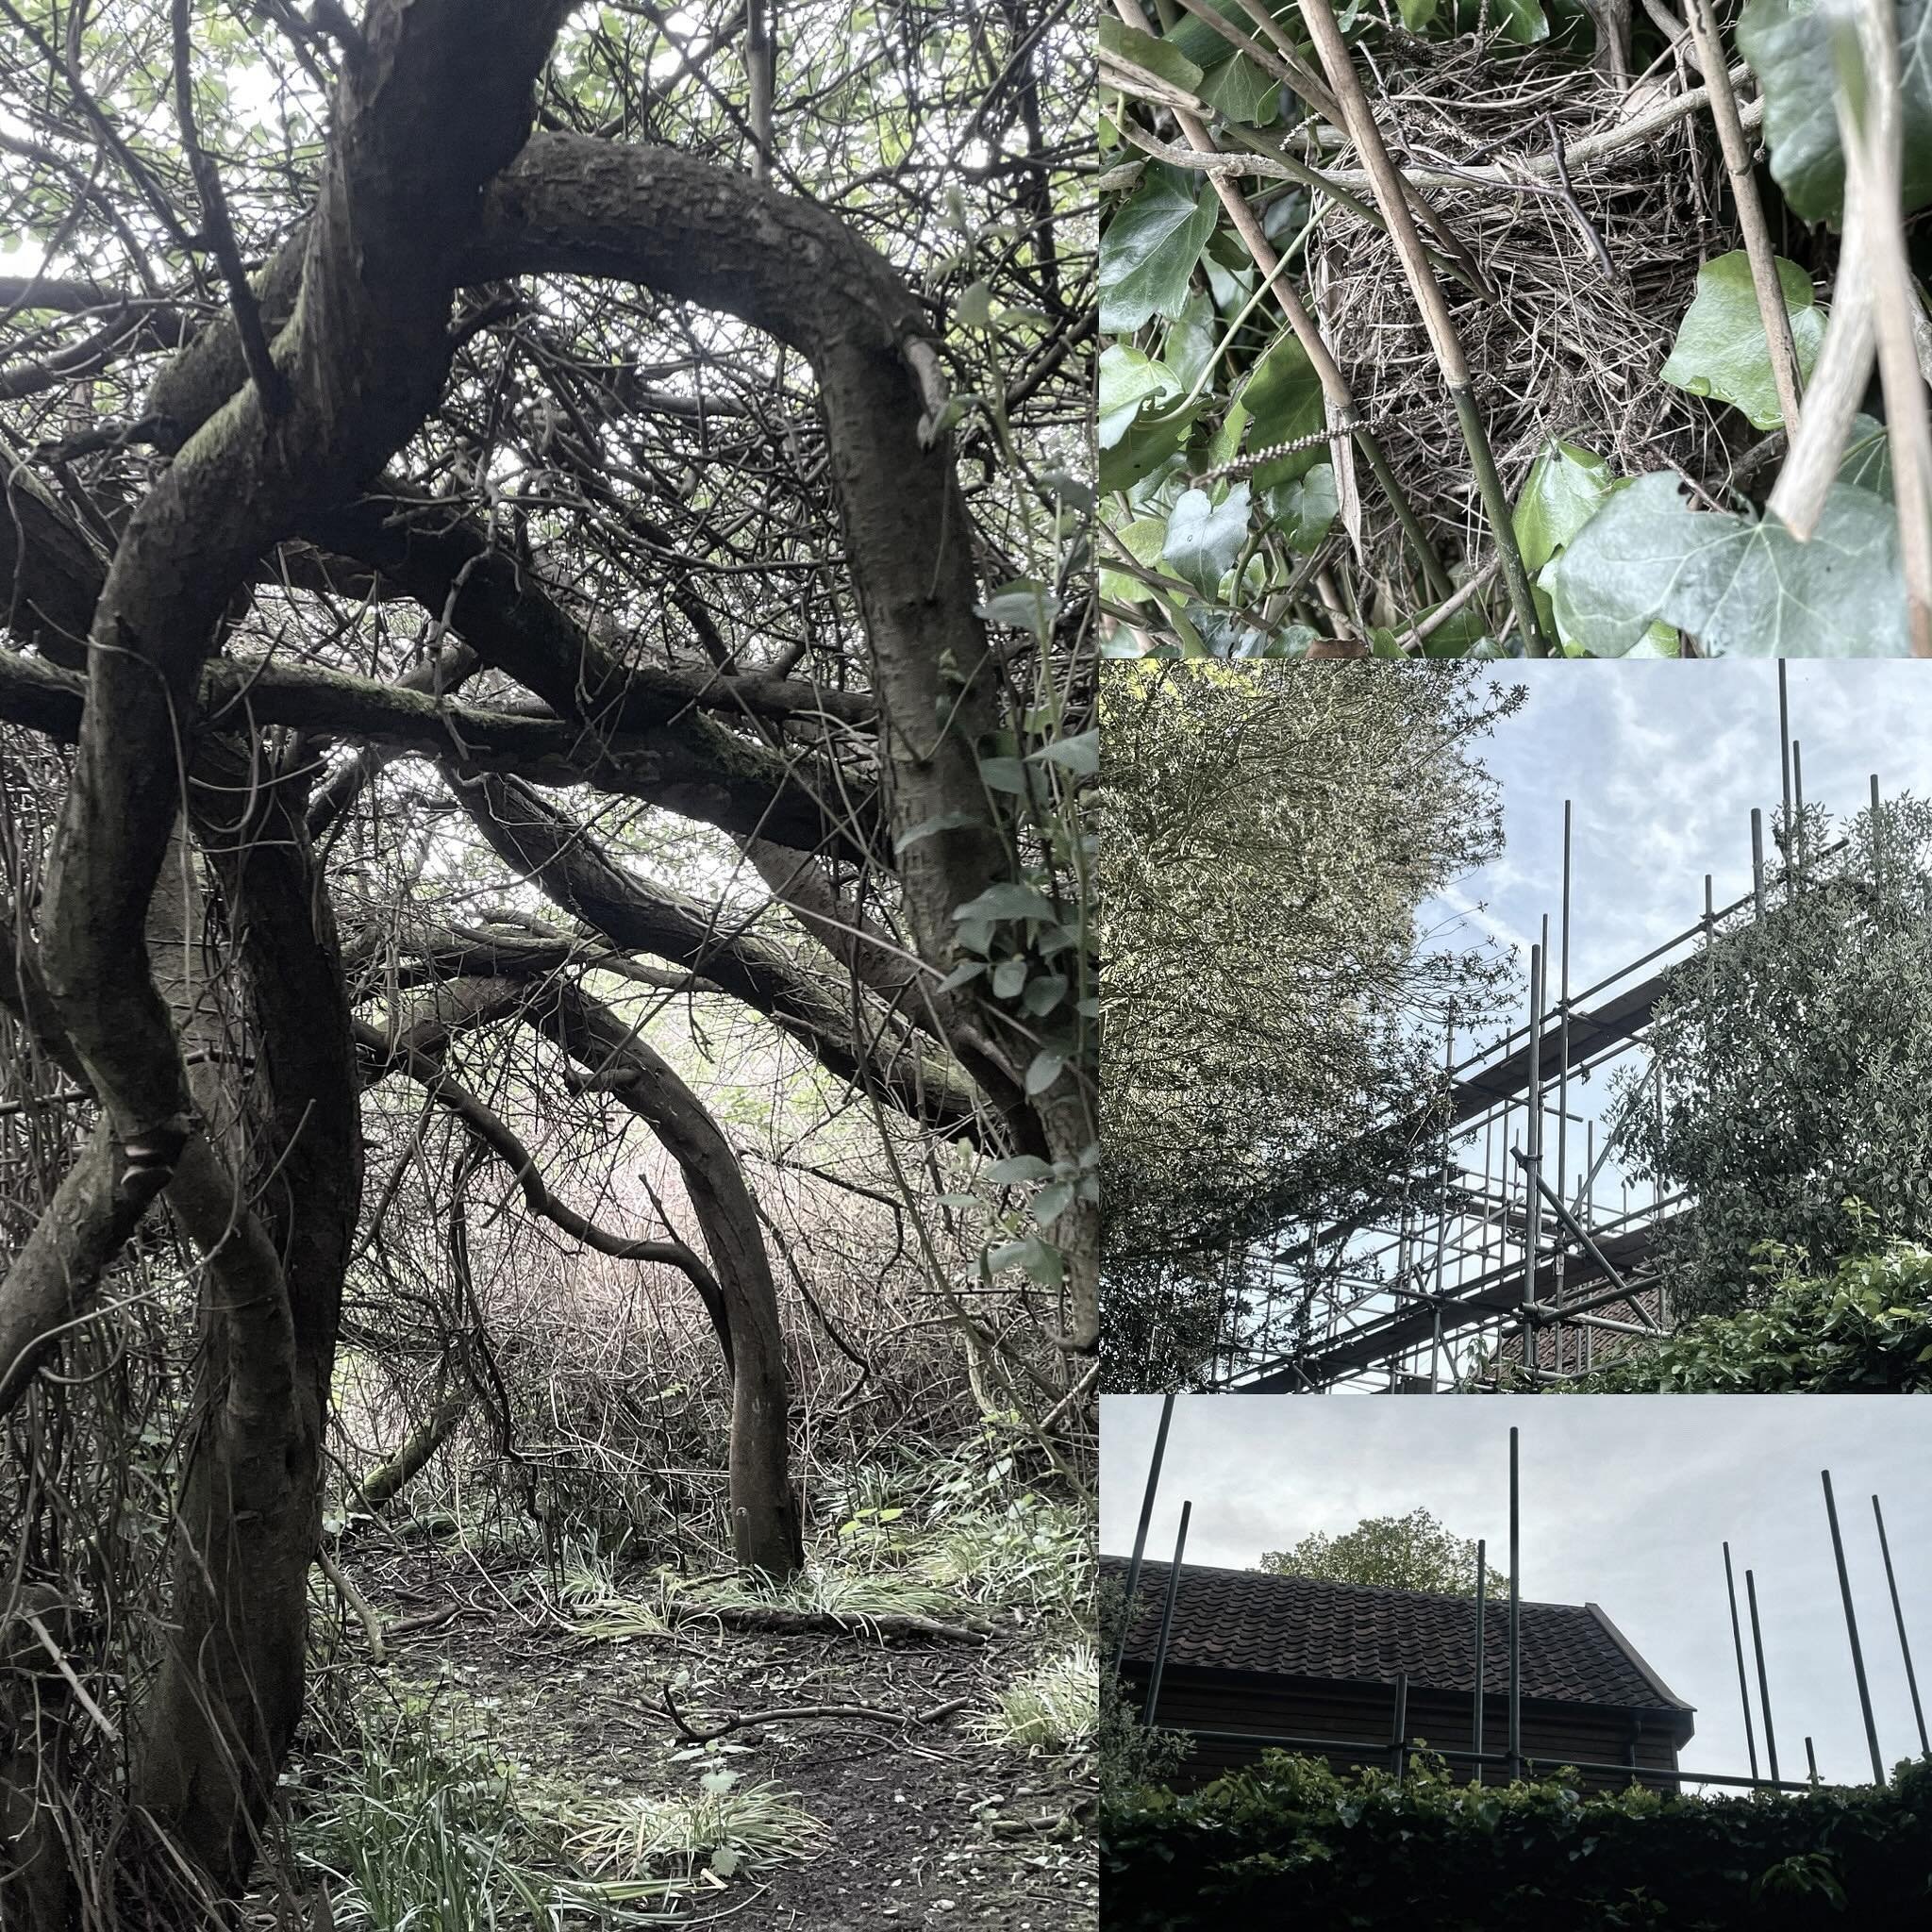 S C A F F O L D I N G in Suffolk. 
Natural and man made.

#scaffolding #trees #nest #bamboo #undergrowth #nature #entwined #complexstructures #manbuiltscaffolding #vernaculararchitecture #structures #fragility #resilience #support #precariousness #ti